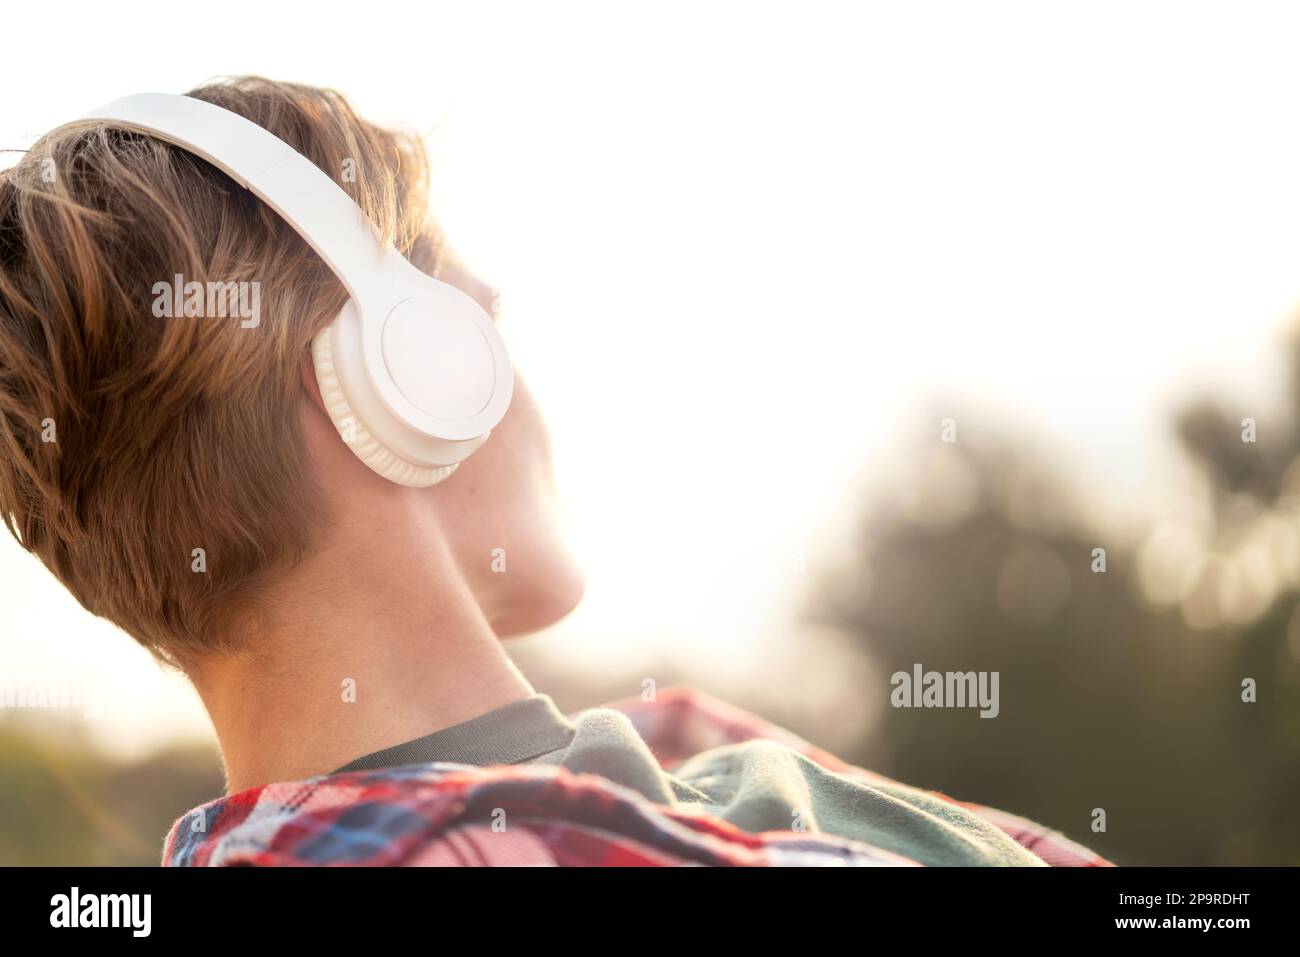 Young urban woman with short hair in big headphones close-up. Stock Photo